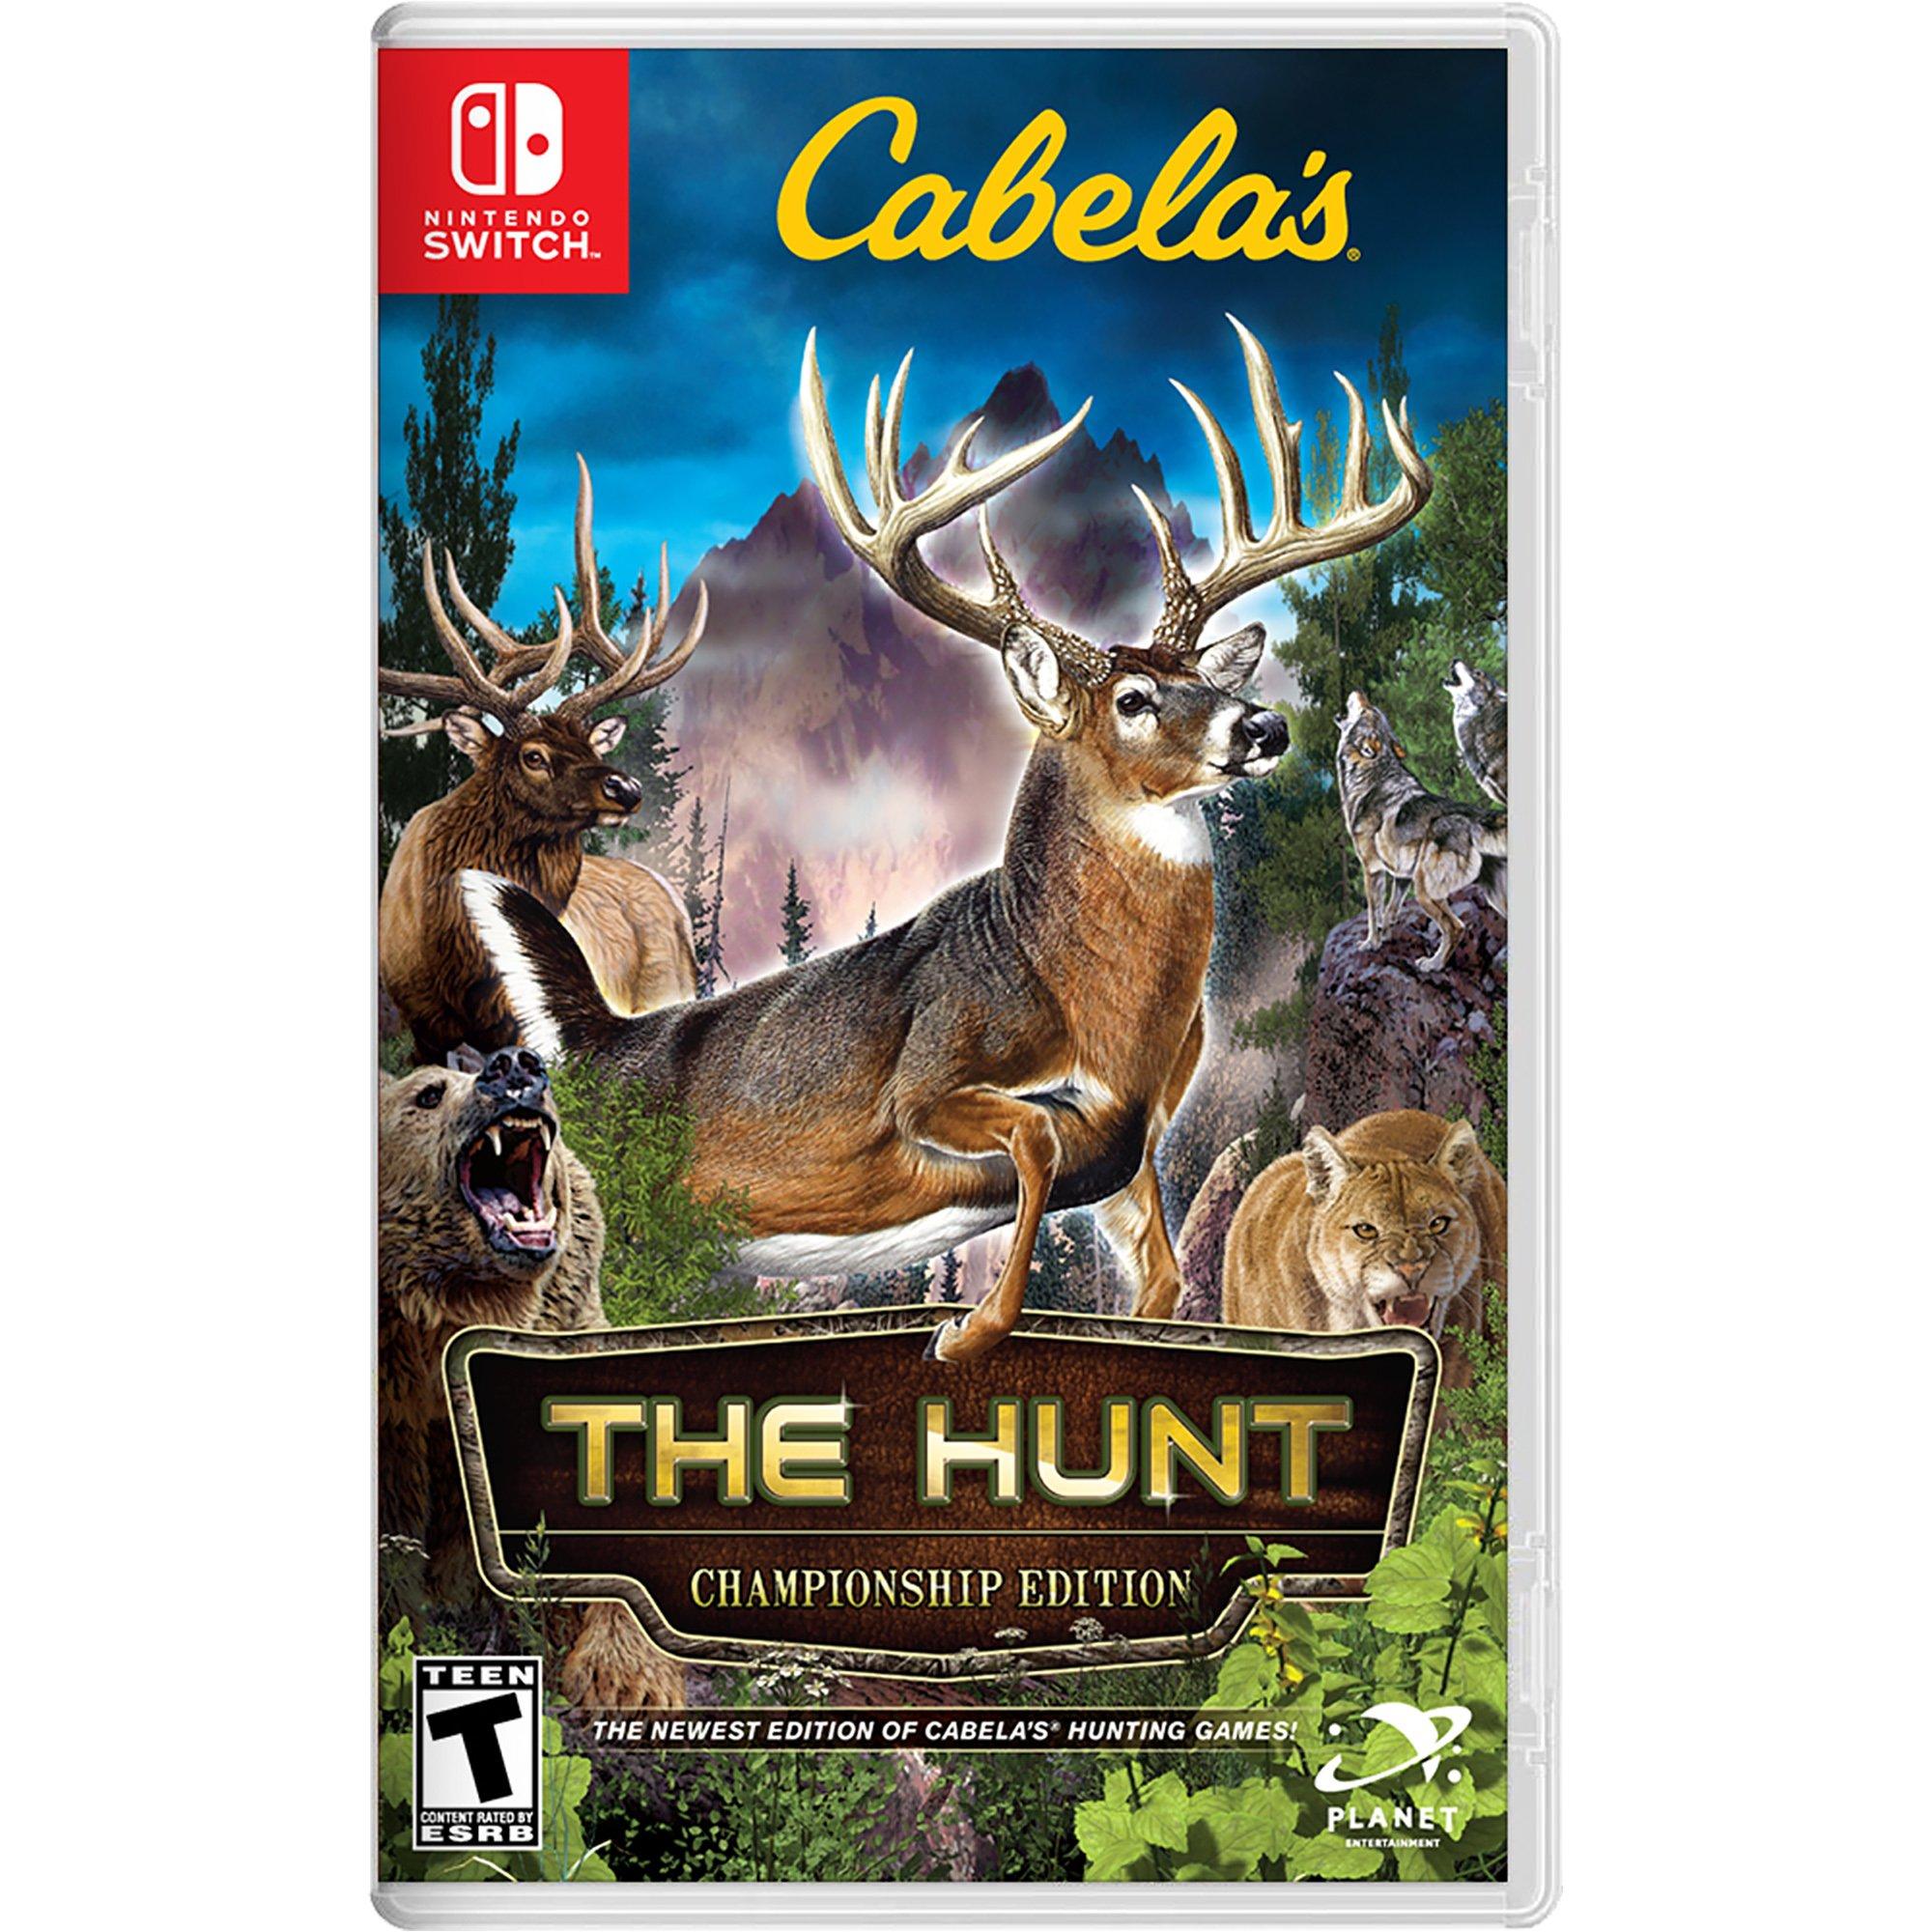 America Wild Hunting for Nintendo Switch - Nintendo Official Site